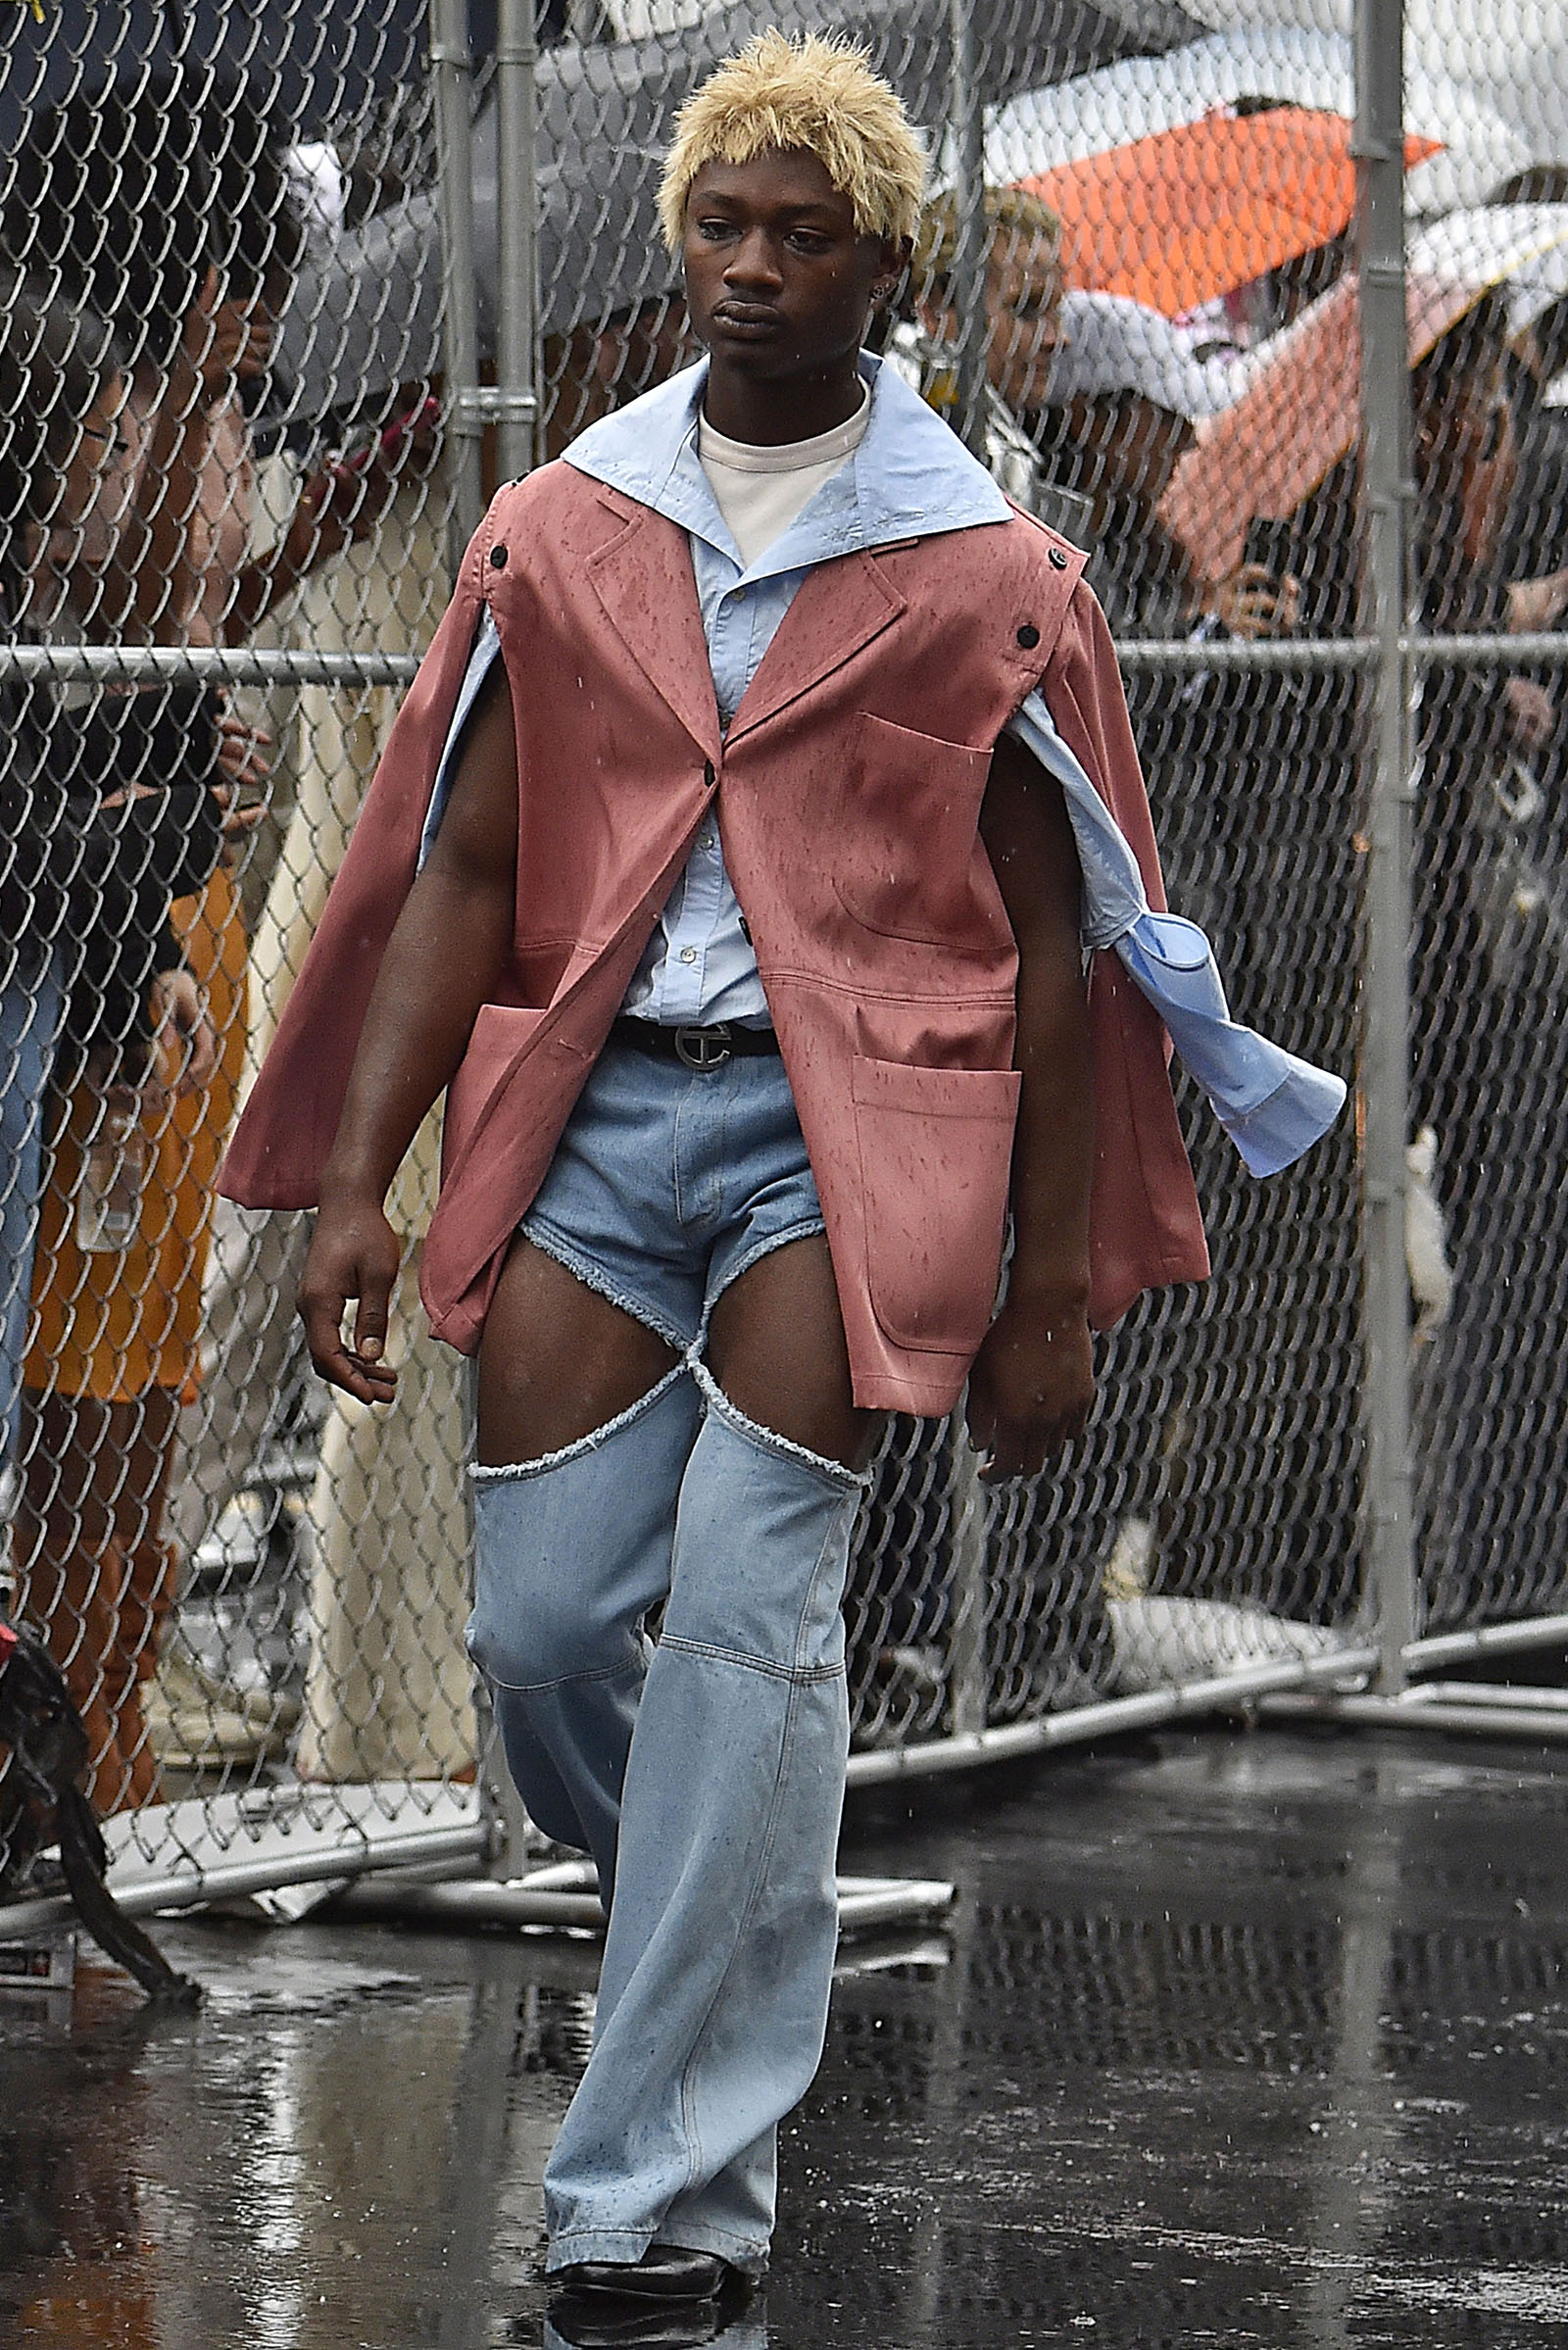 The-Most-Bizzare-Outfits-from-NYFW-2018-Telfar